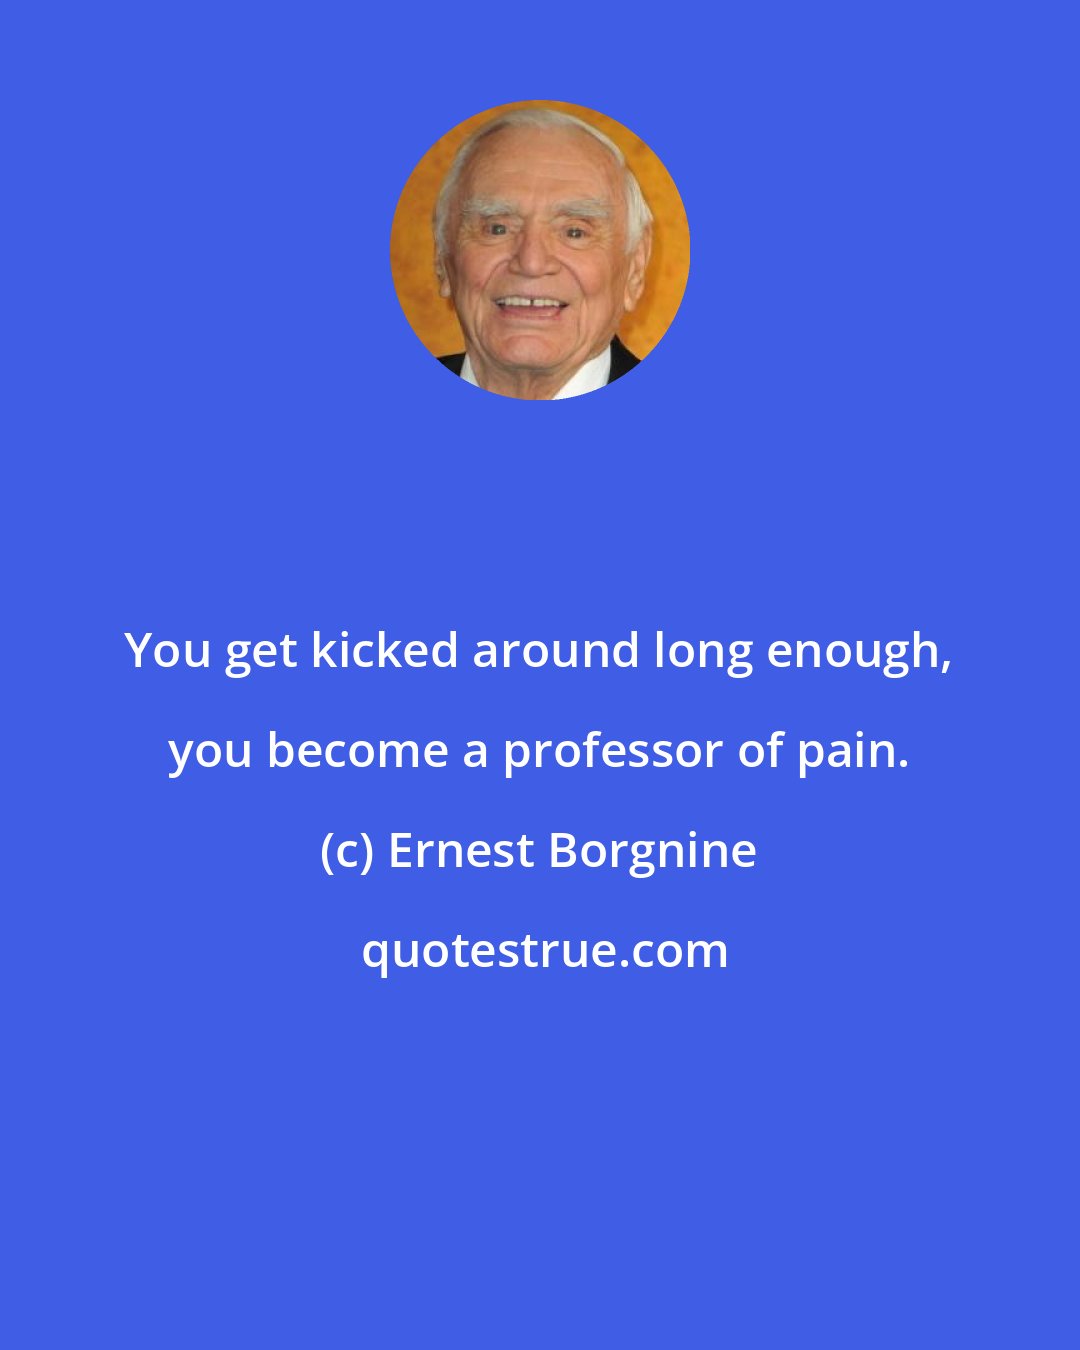 Ernest Borgnine: You get kicked around long enough, you become a professor of pain.